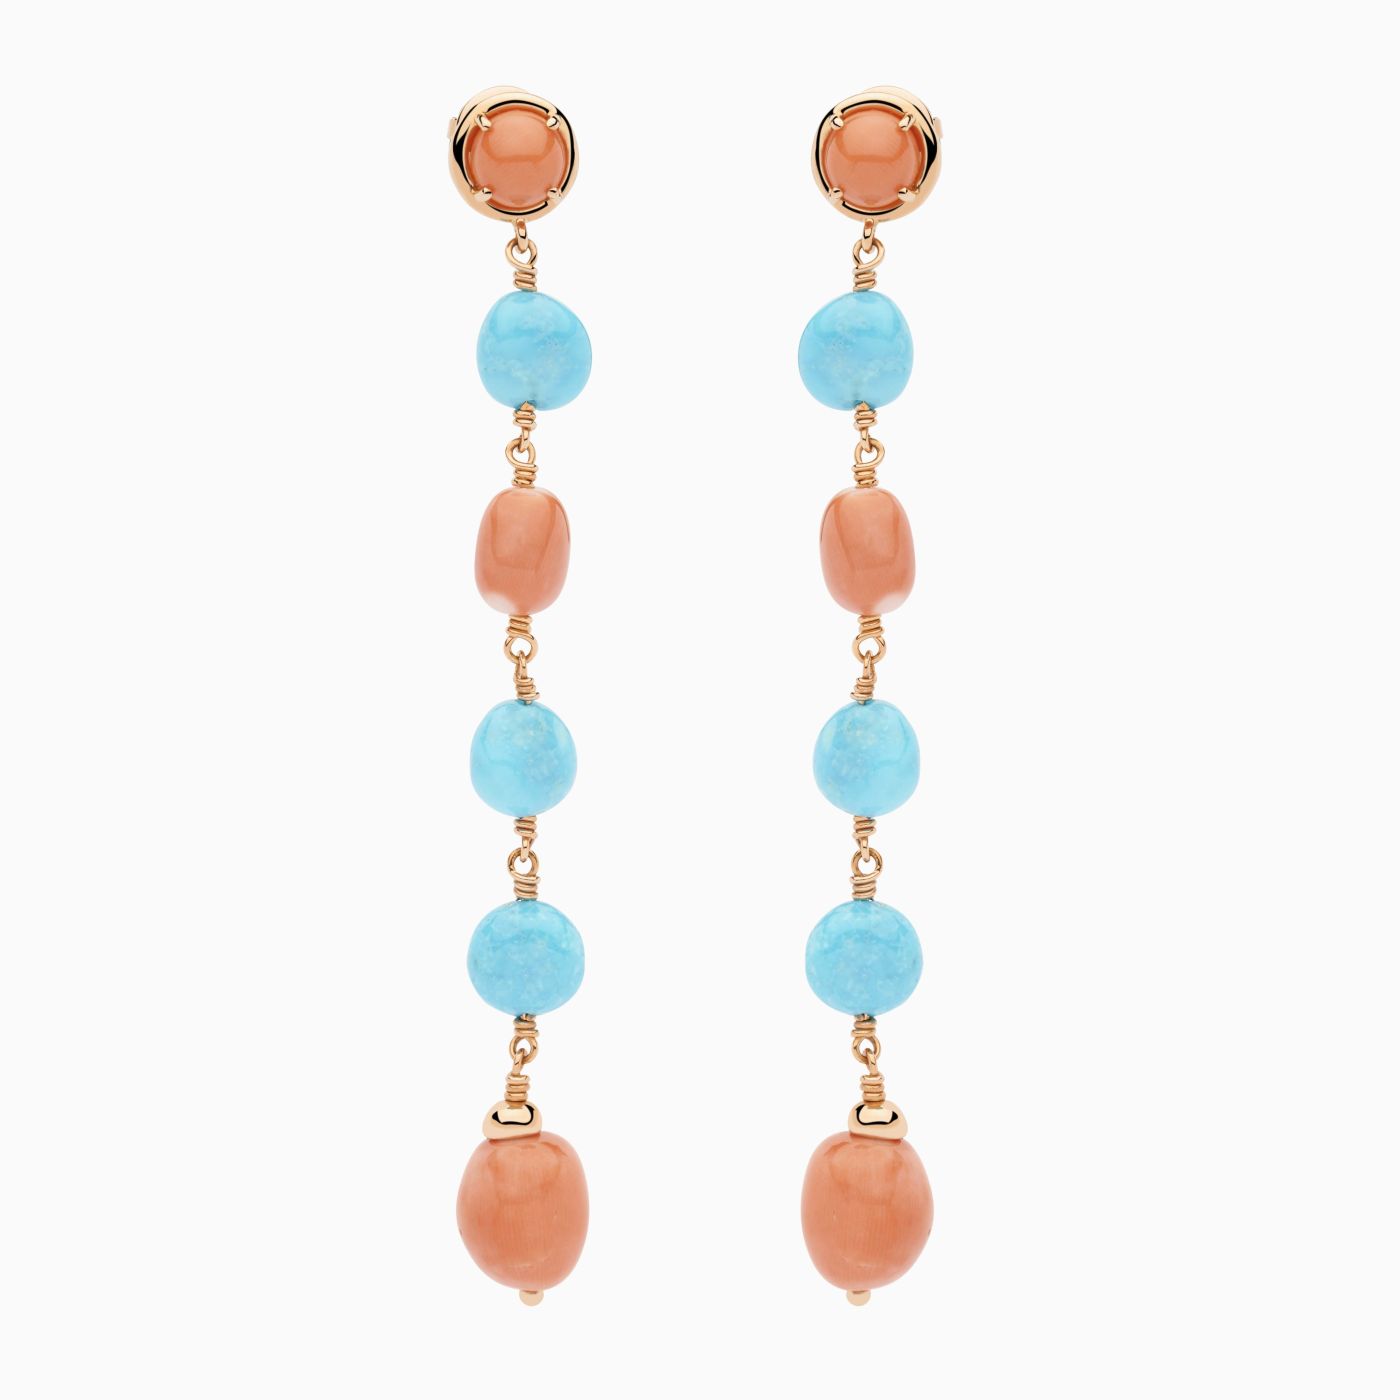 Rose gold earrings with coral and turquoise gems